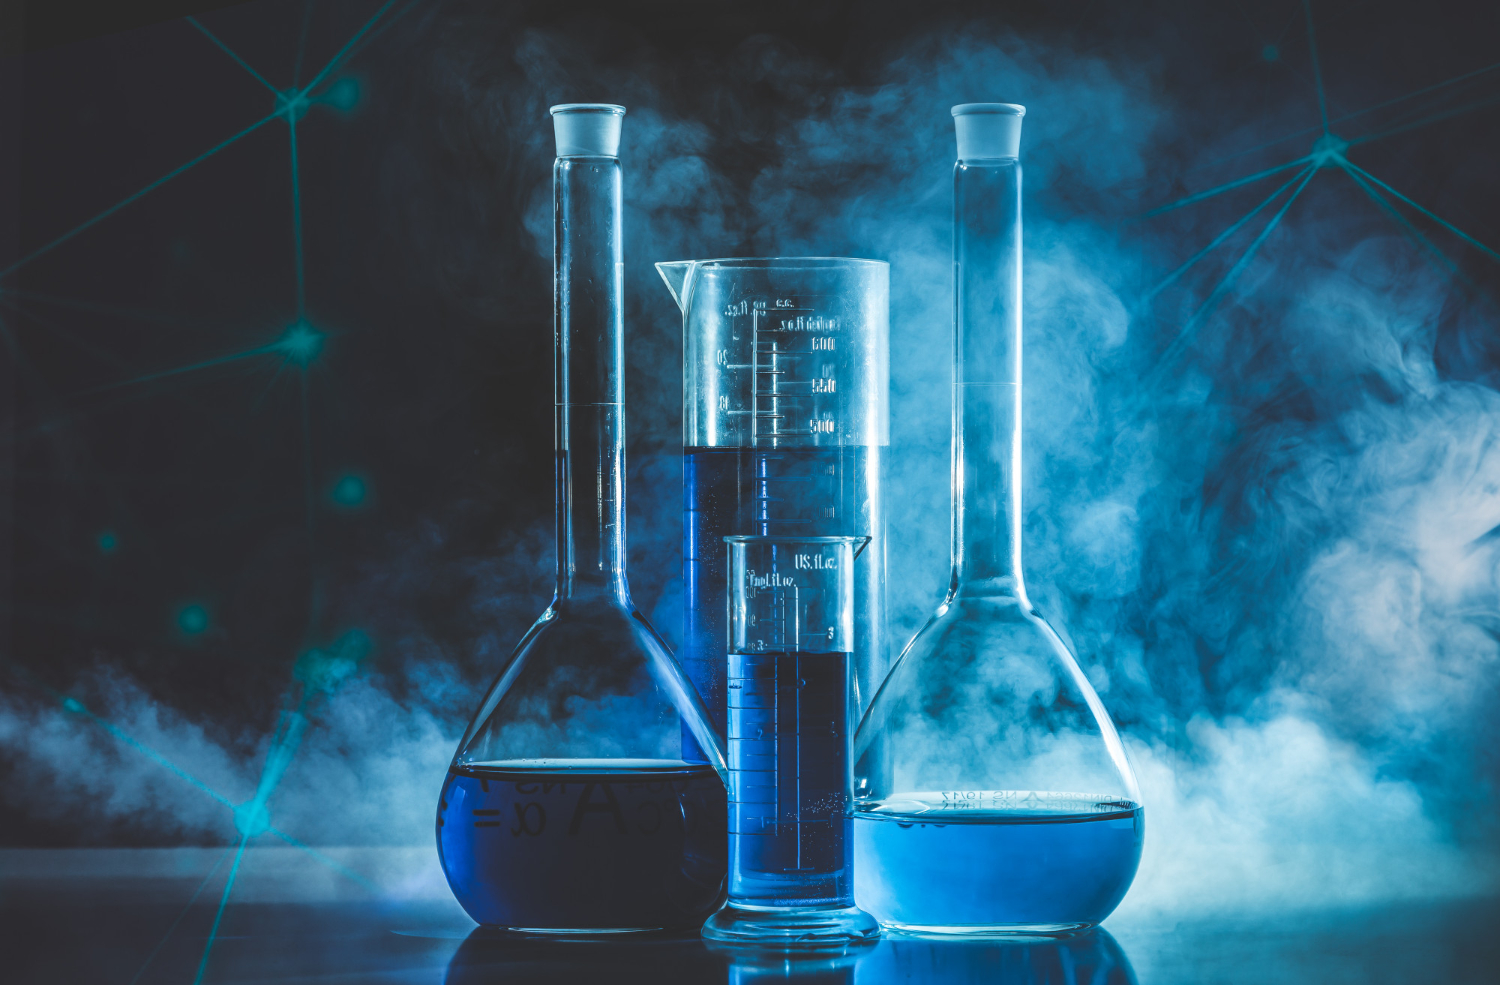 test-tube-flask-with-blue-liquid-blue-smoke-chemistry-laboratory-concept